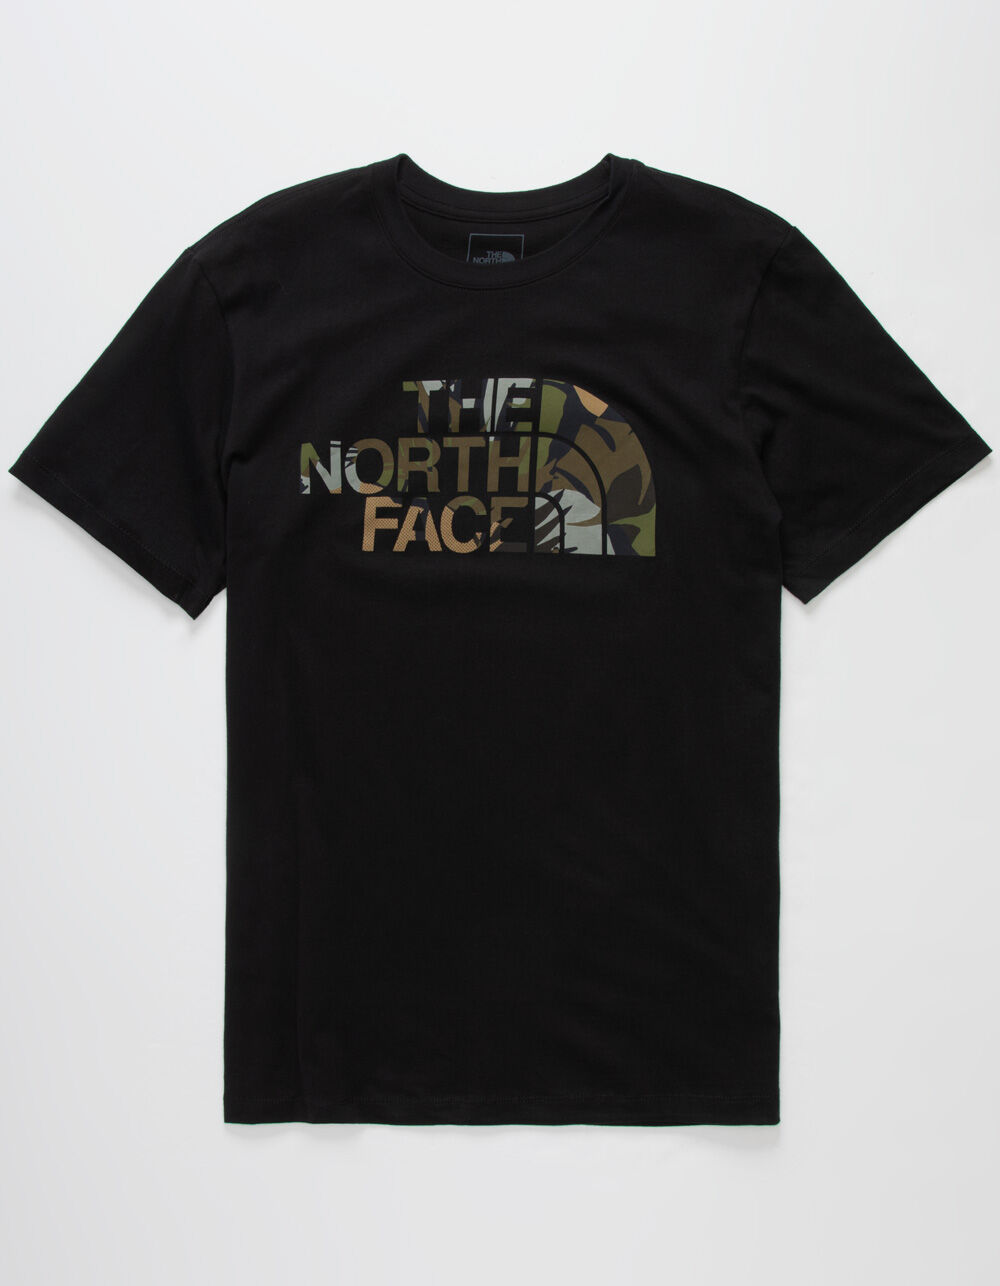 THE NORTH FACE - Men's regular T-shirt with contrasting logo